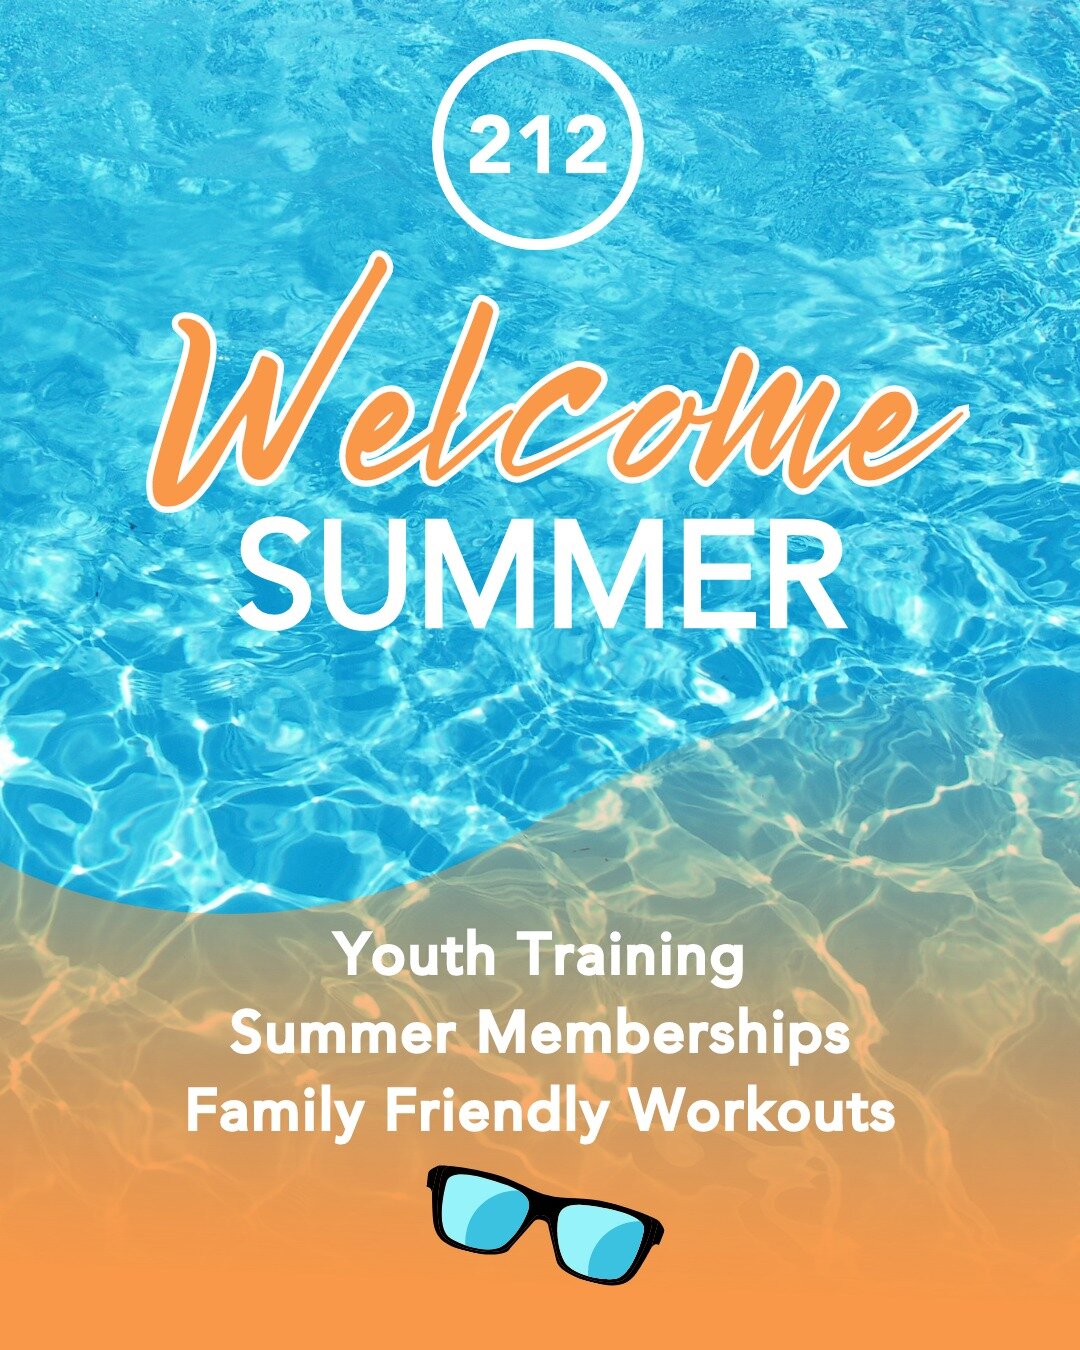 It's summer, only stronger 💪😎

Summer is just around the corner, how are you going to spend it?? 212 has short term memberships available for those staying in town for the season, anyone experiencing some sort of transition in life or...for any rea